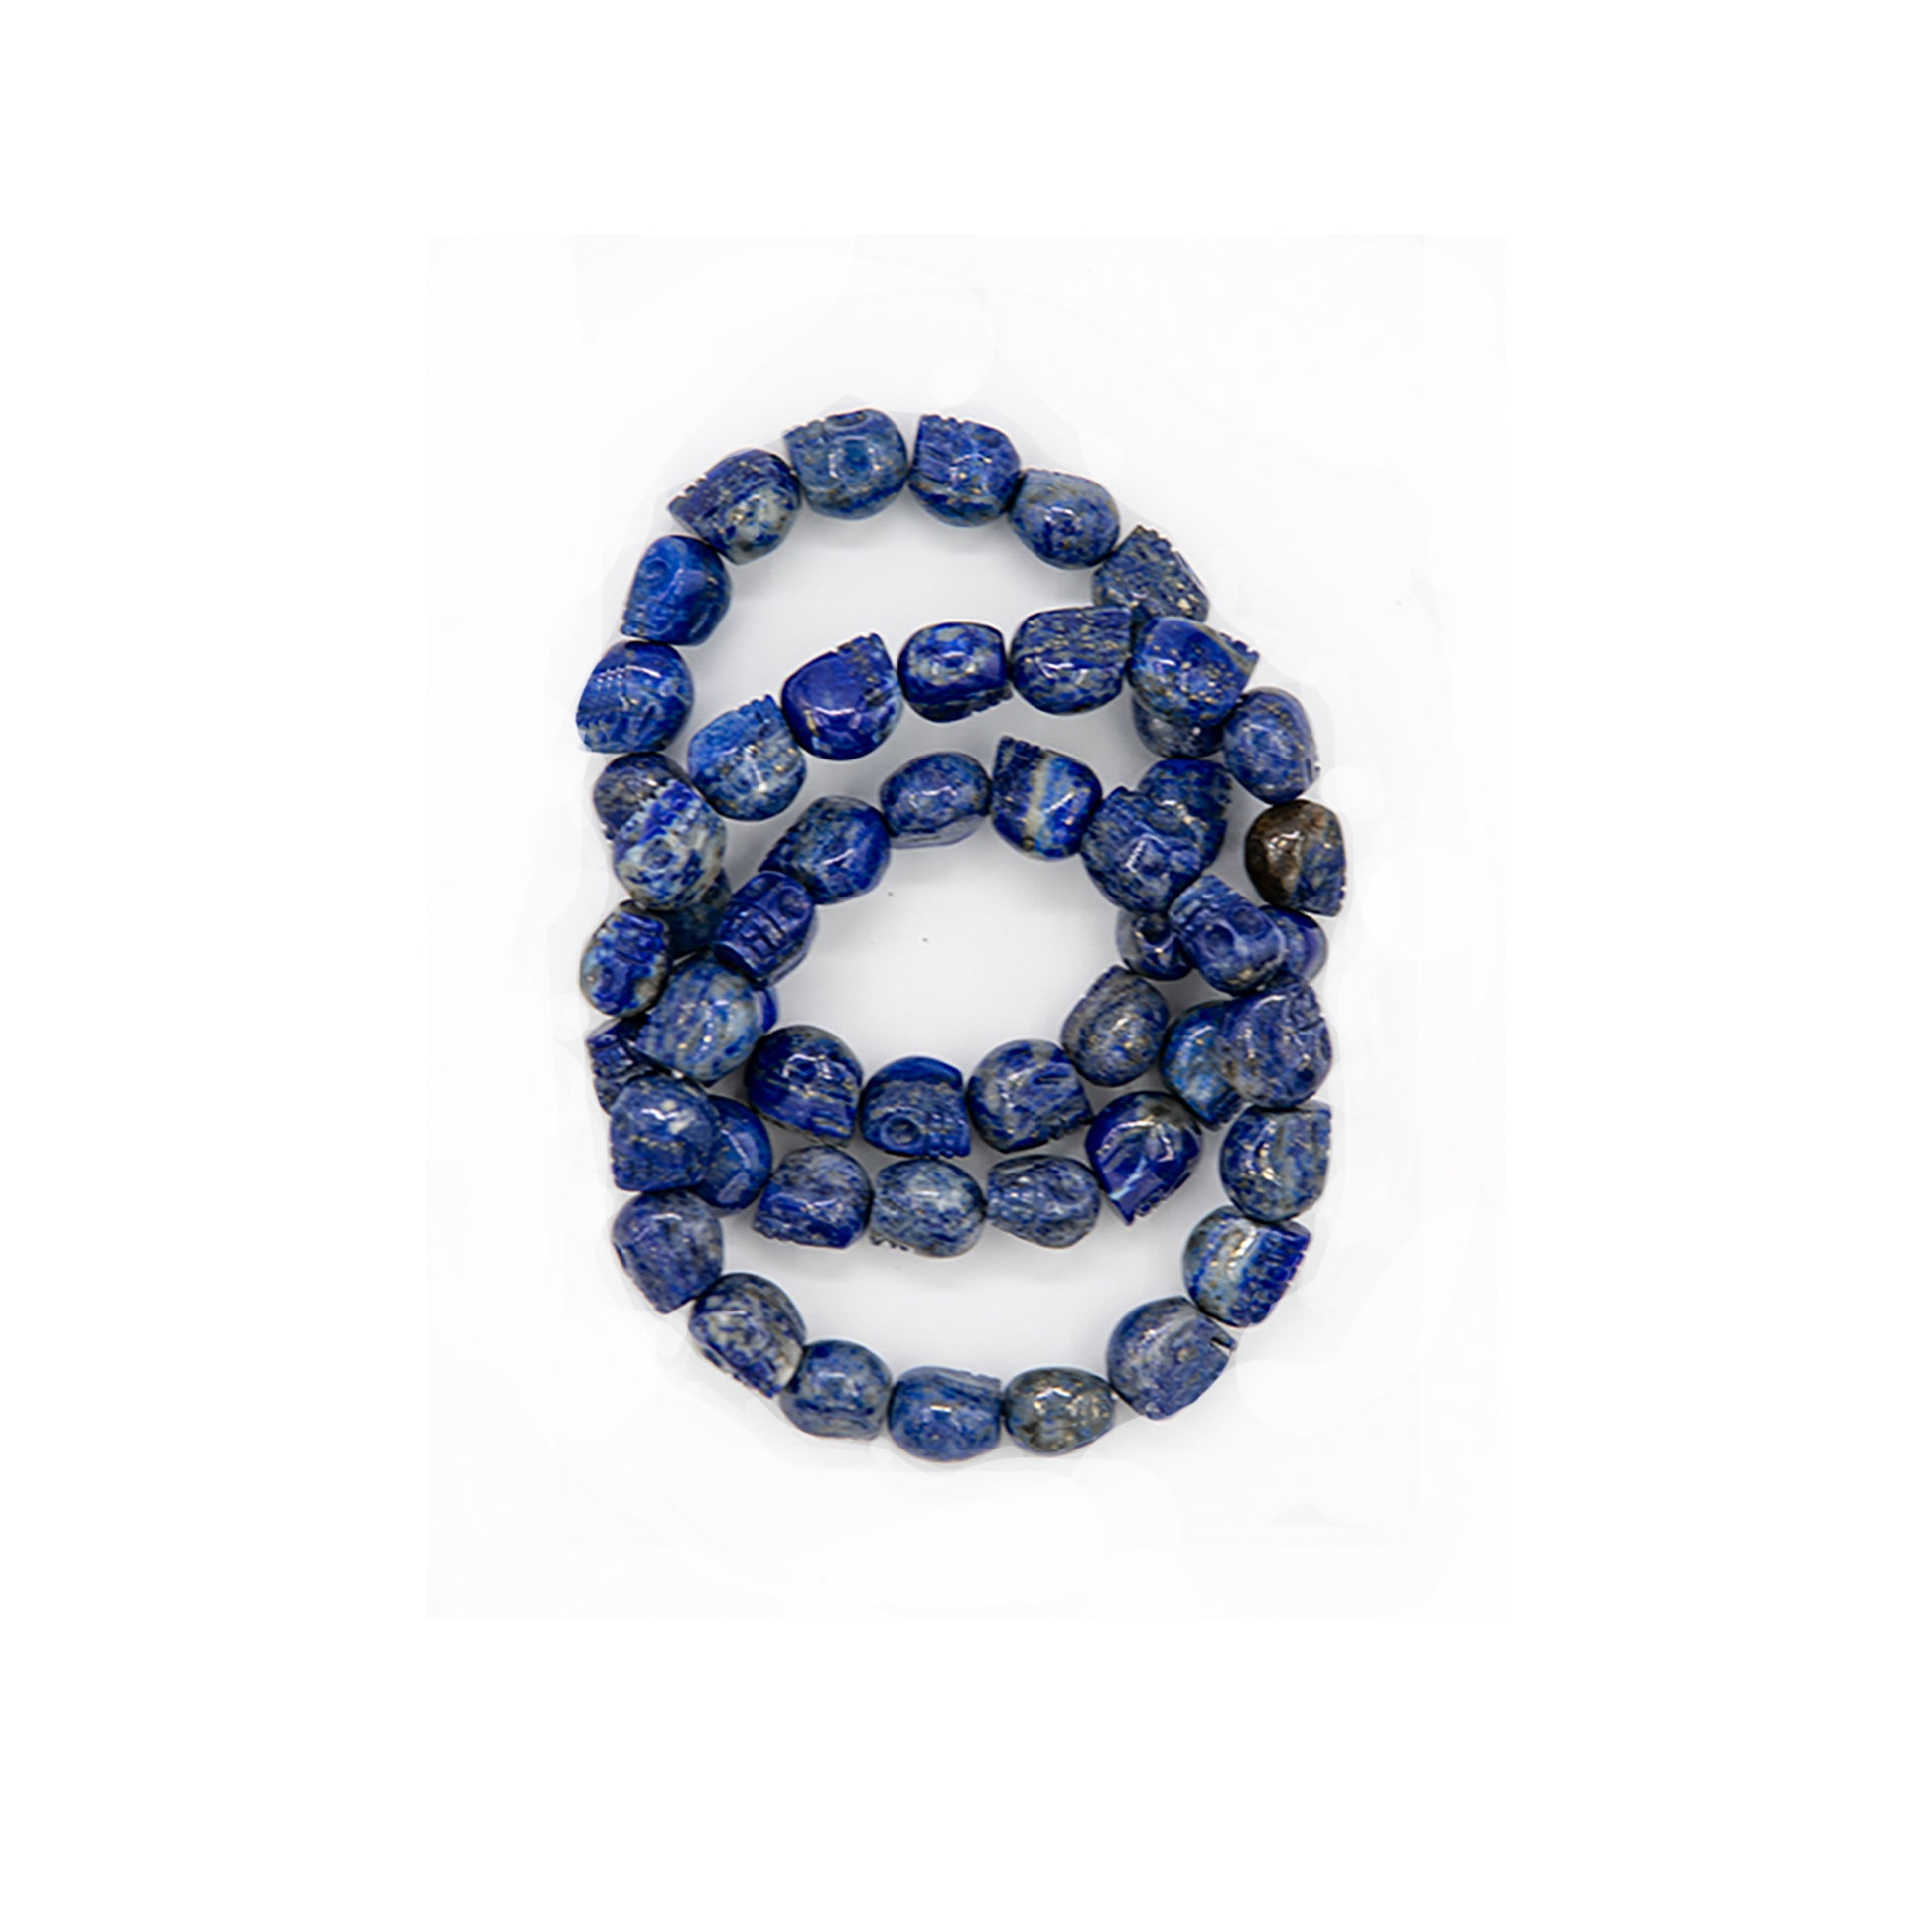 Lapis Lazuli Skull Bracelets.  Very cool, carved blue lapis miniature skull beads strung on stretch cord. Beautiful color.  One size fits most. You will receive one similar to the ones pictured. Skulls are about 3/8 inch in diameter and nicely carved.